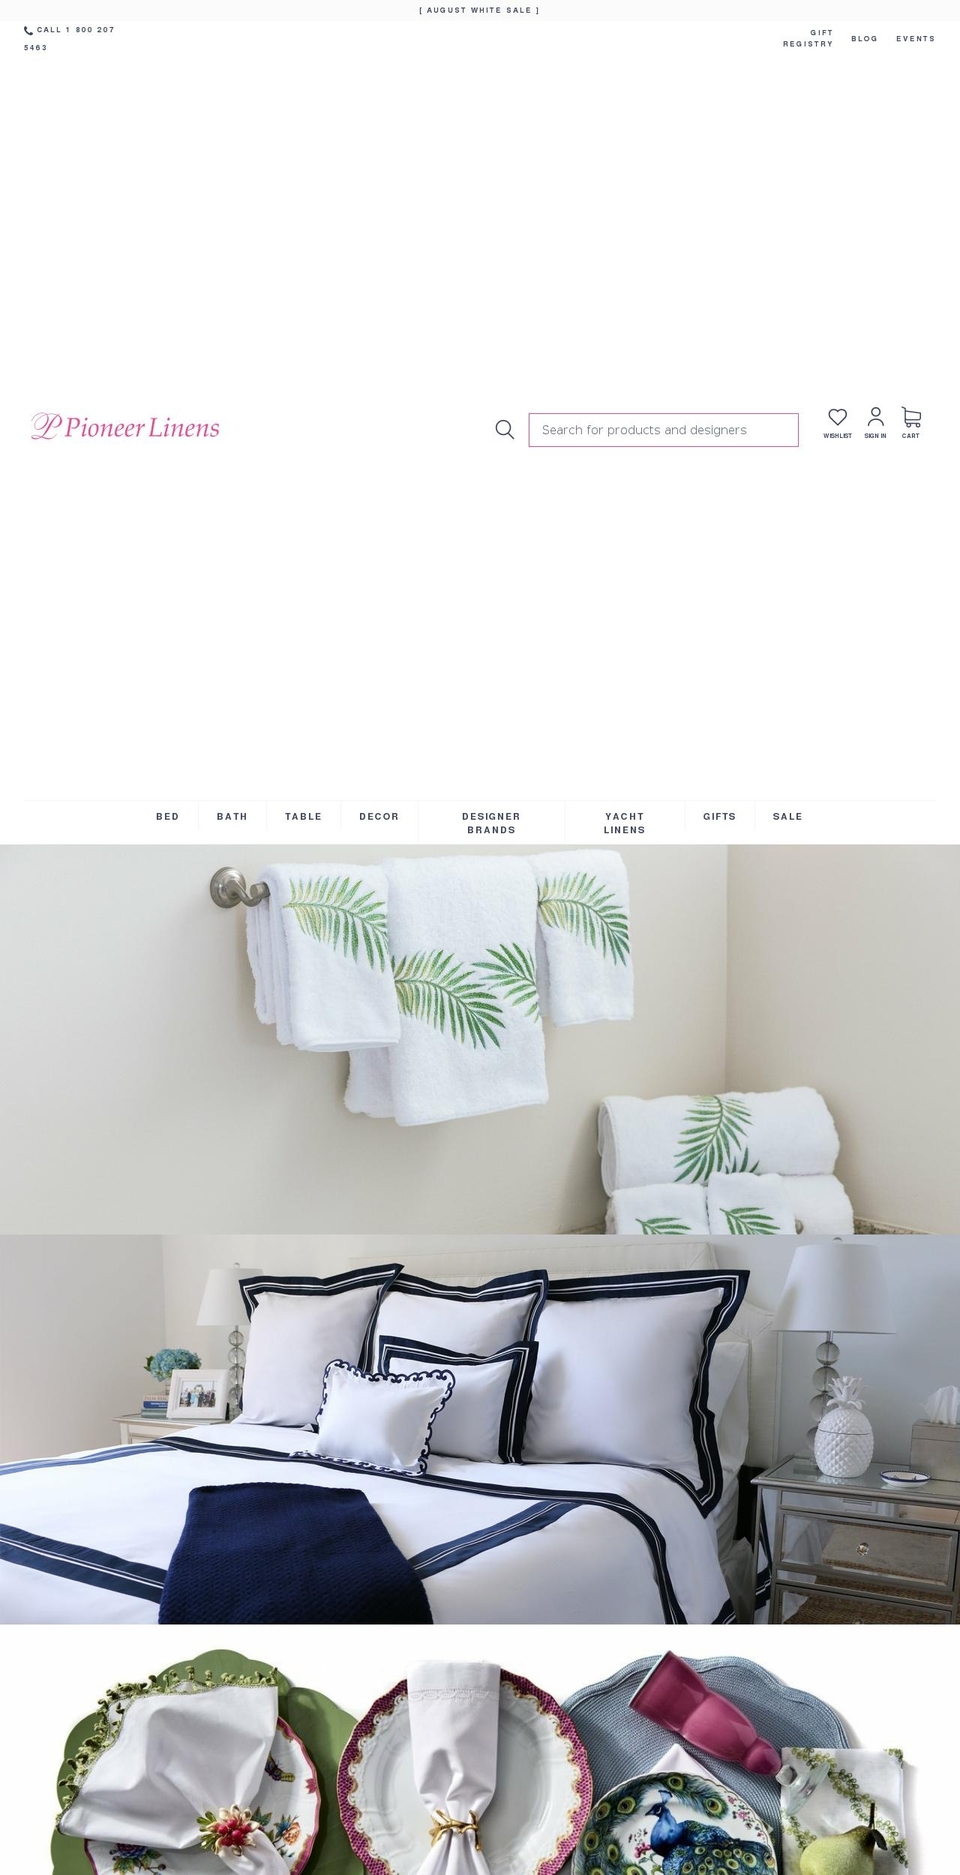 Buko Shopify Theme - Products Consolidation Shopify theme site example yachtlinens.com